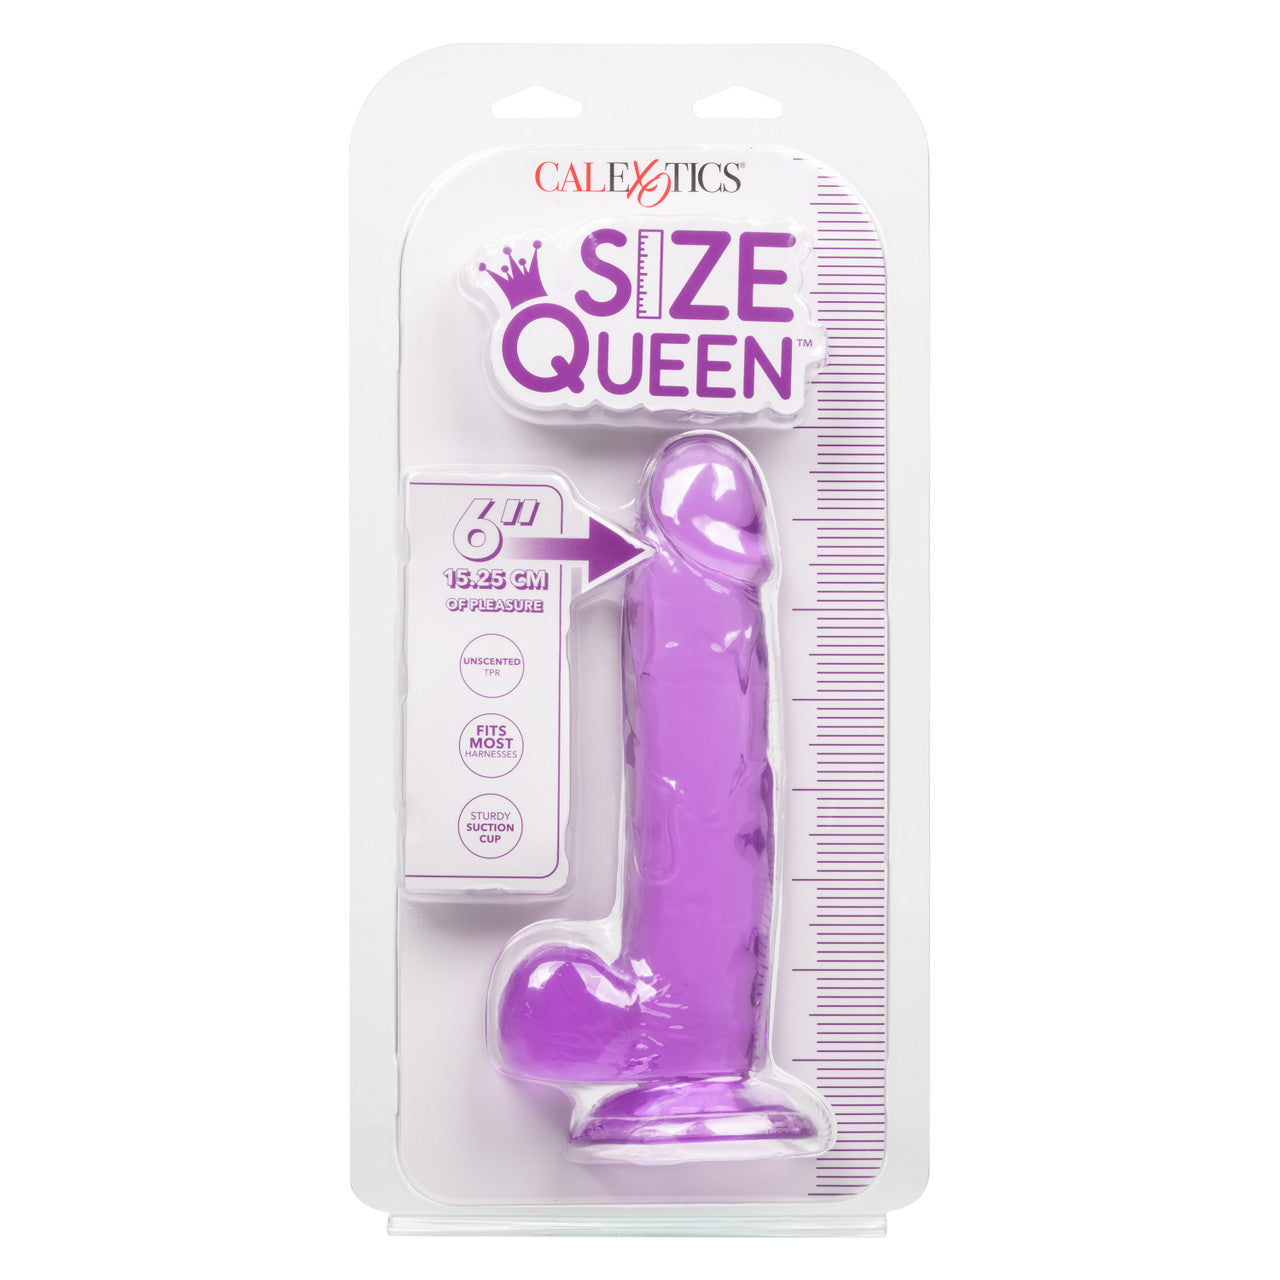 Size Queen 6"/15.25 cm Dildo - Purple - Thorn & Feather Sex Toy Canada